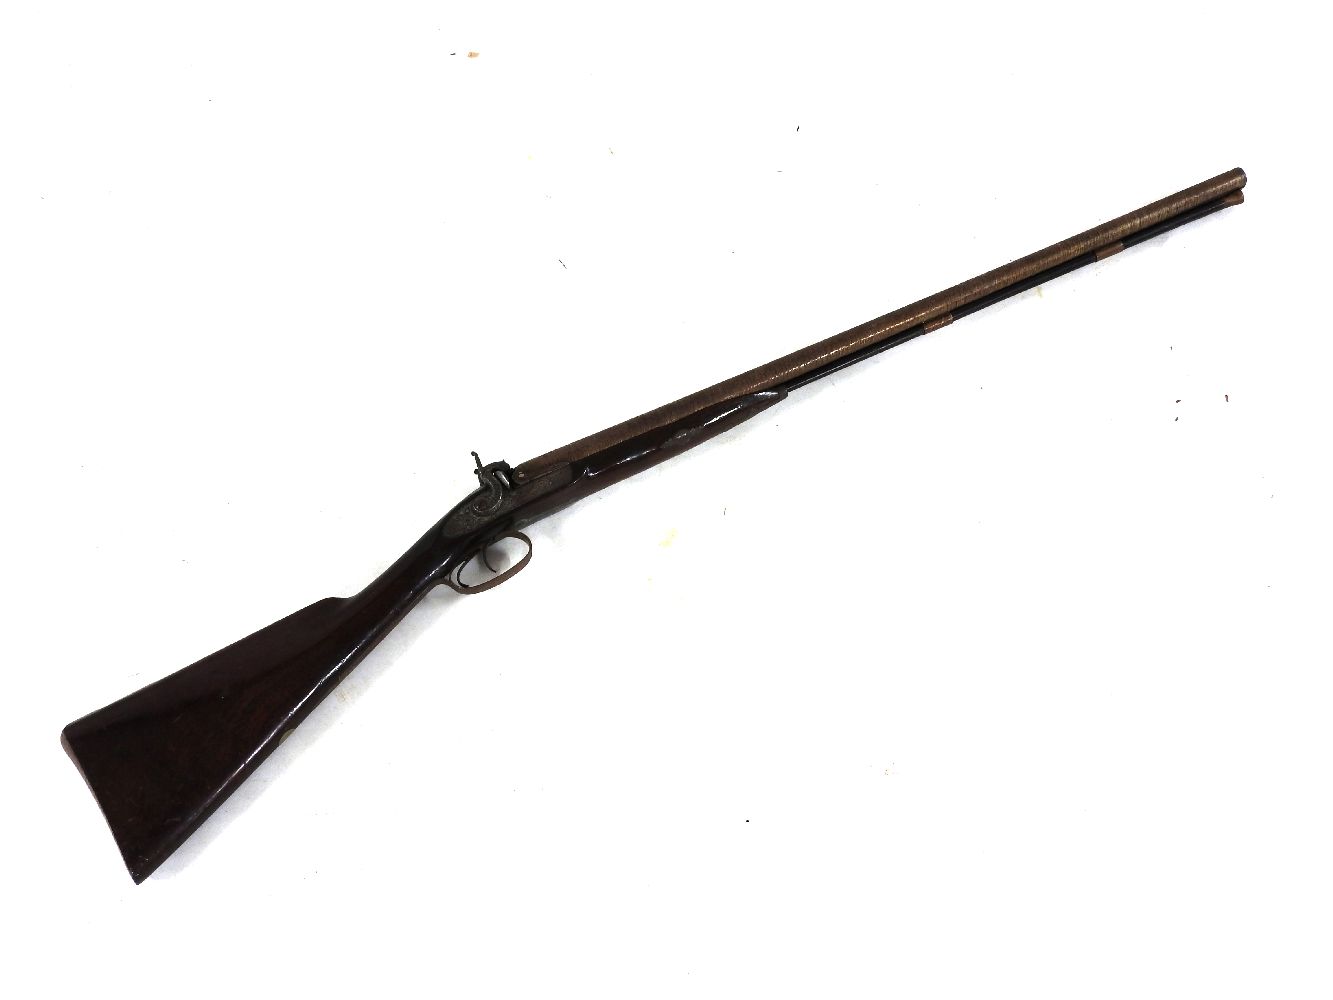 A B Dexter twin barrel shotgun, with mahogany stock and engraved steel plates, the barrel